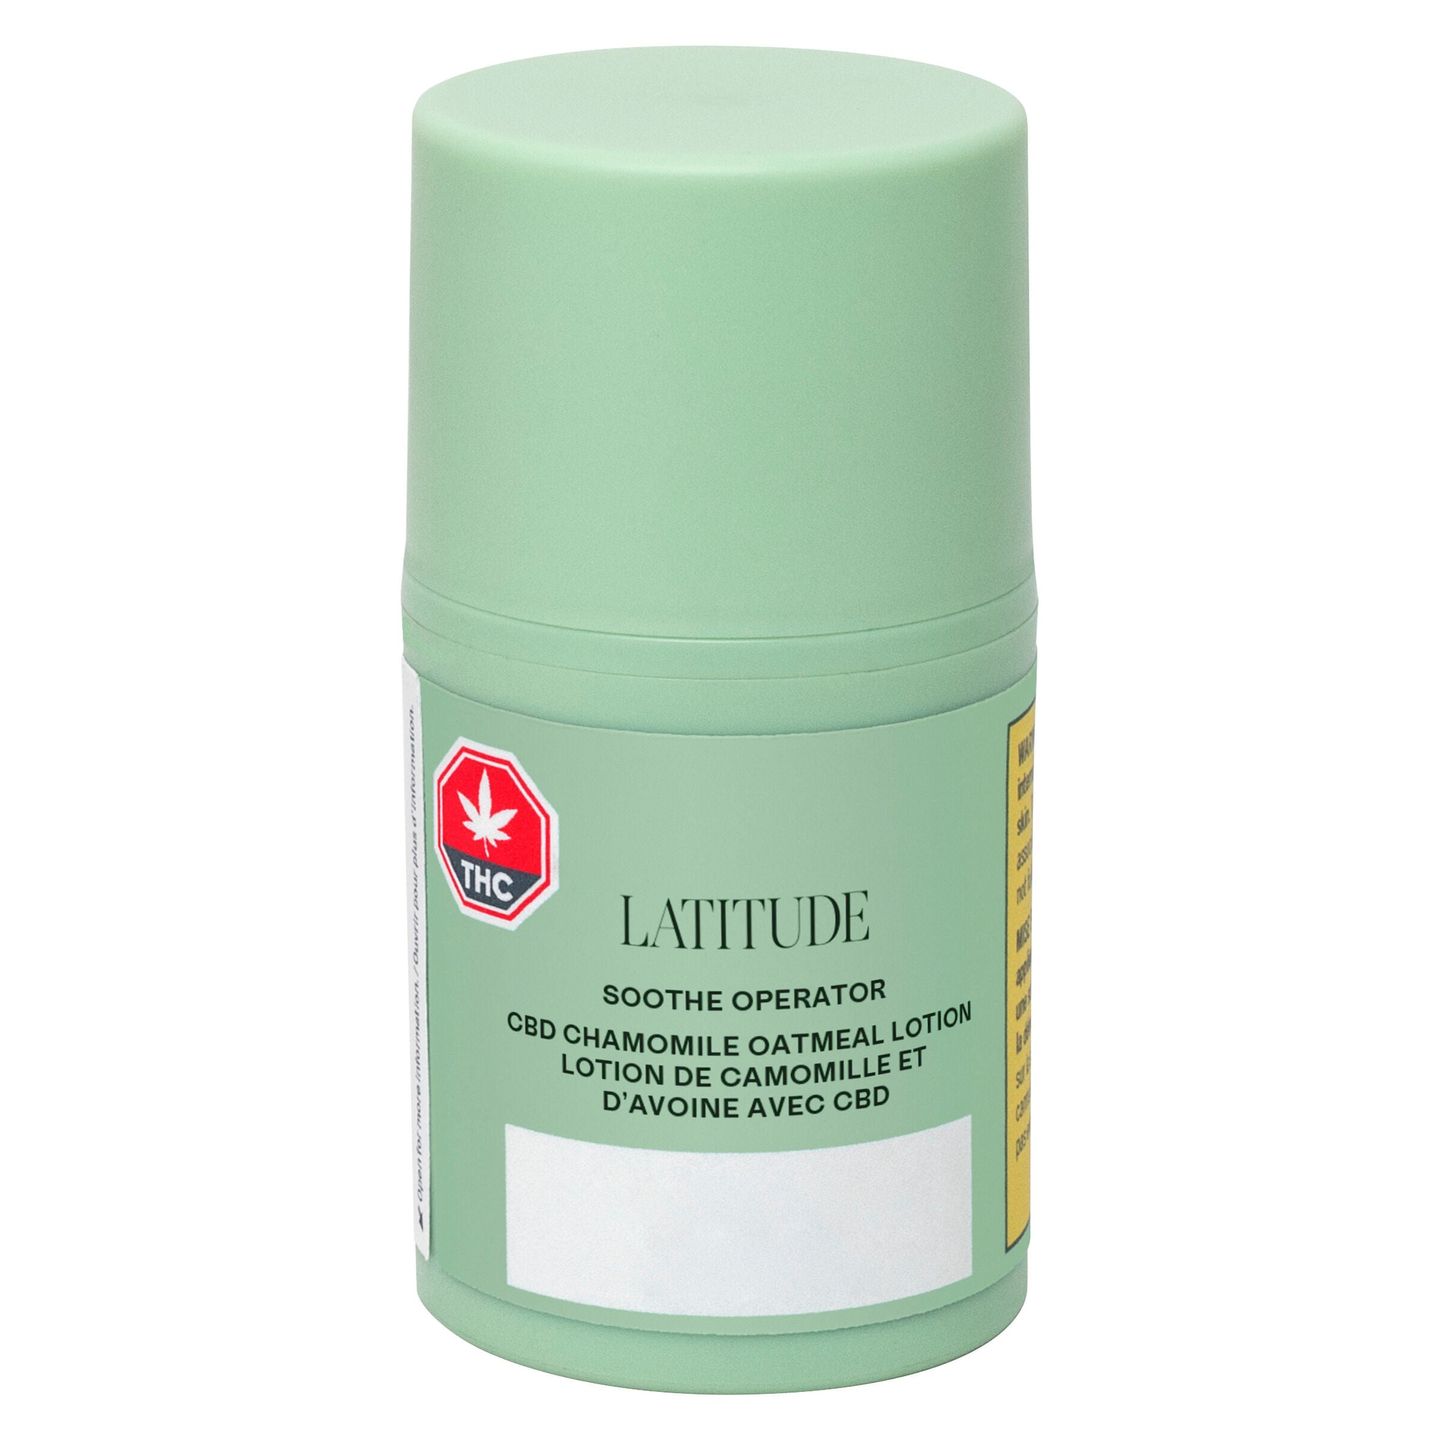 Cannabis Product Soothe Operator CBD Chamomile Oatmeal Lotion by Latitude